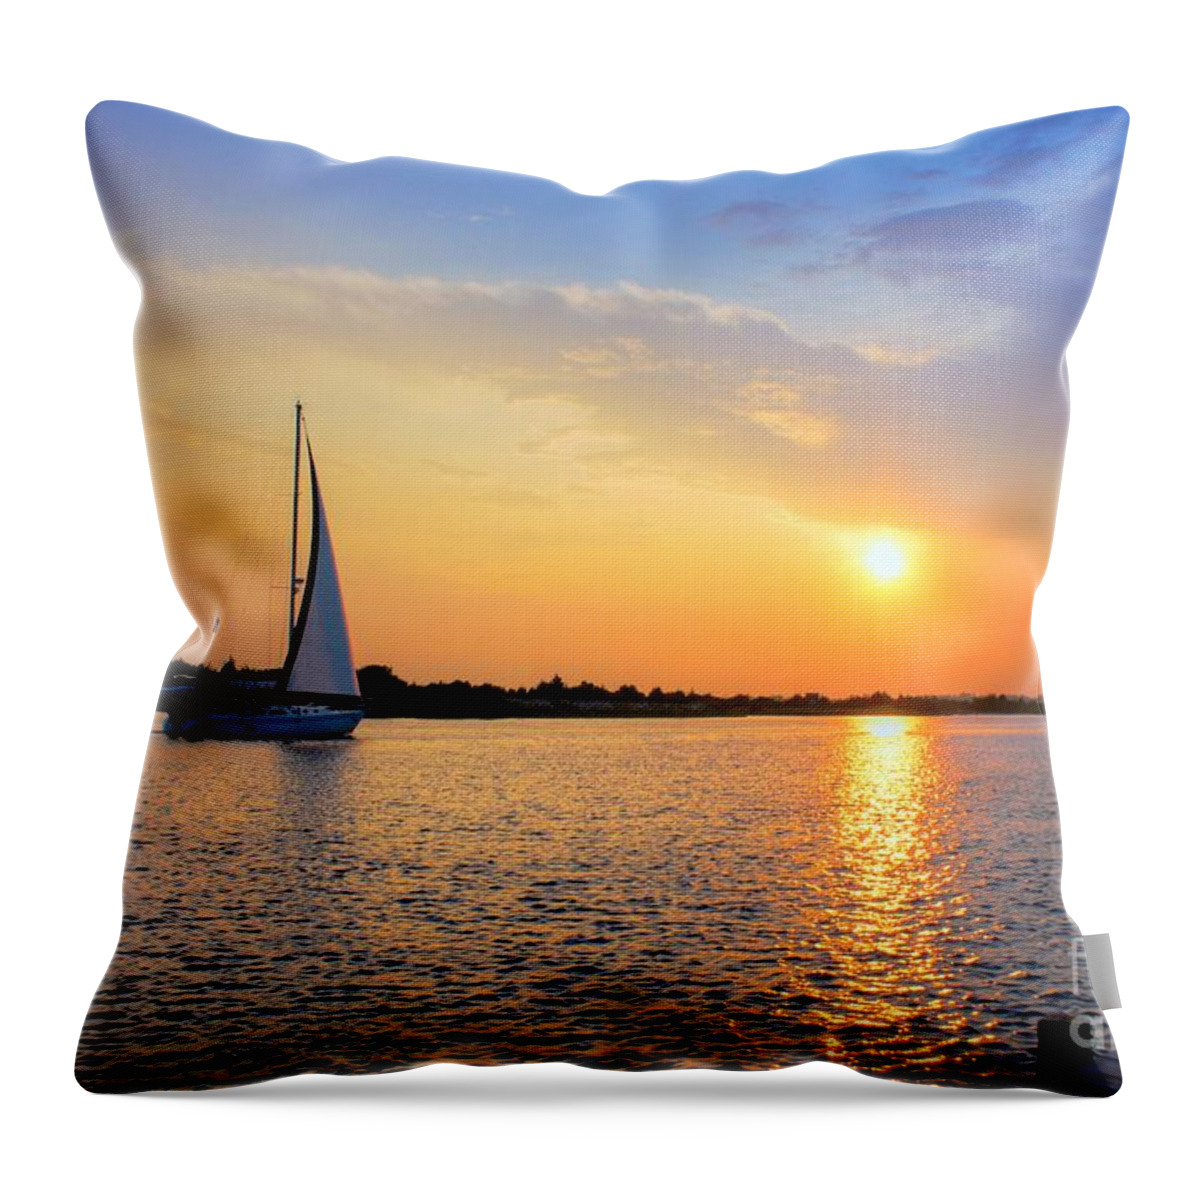 Sailing Throw Pillow featuring the photograph Sailing Into The Sunset by Benanne Stiens